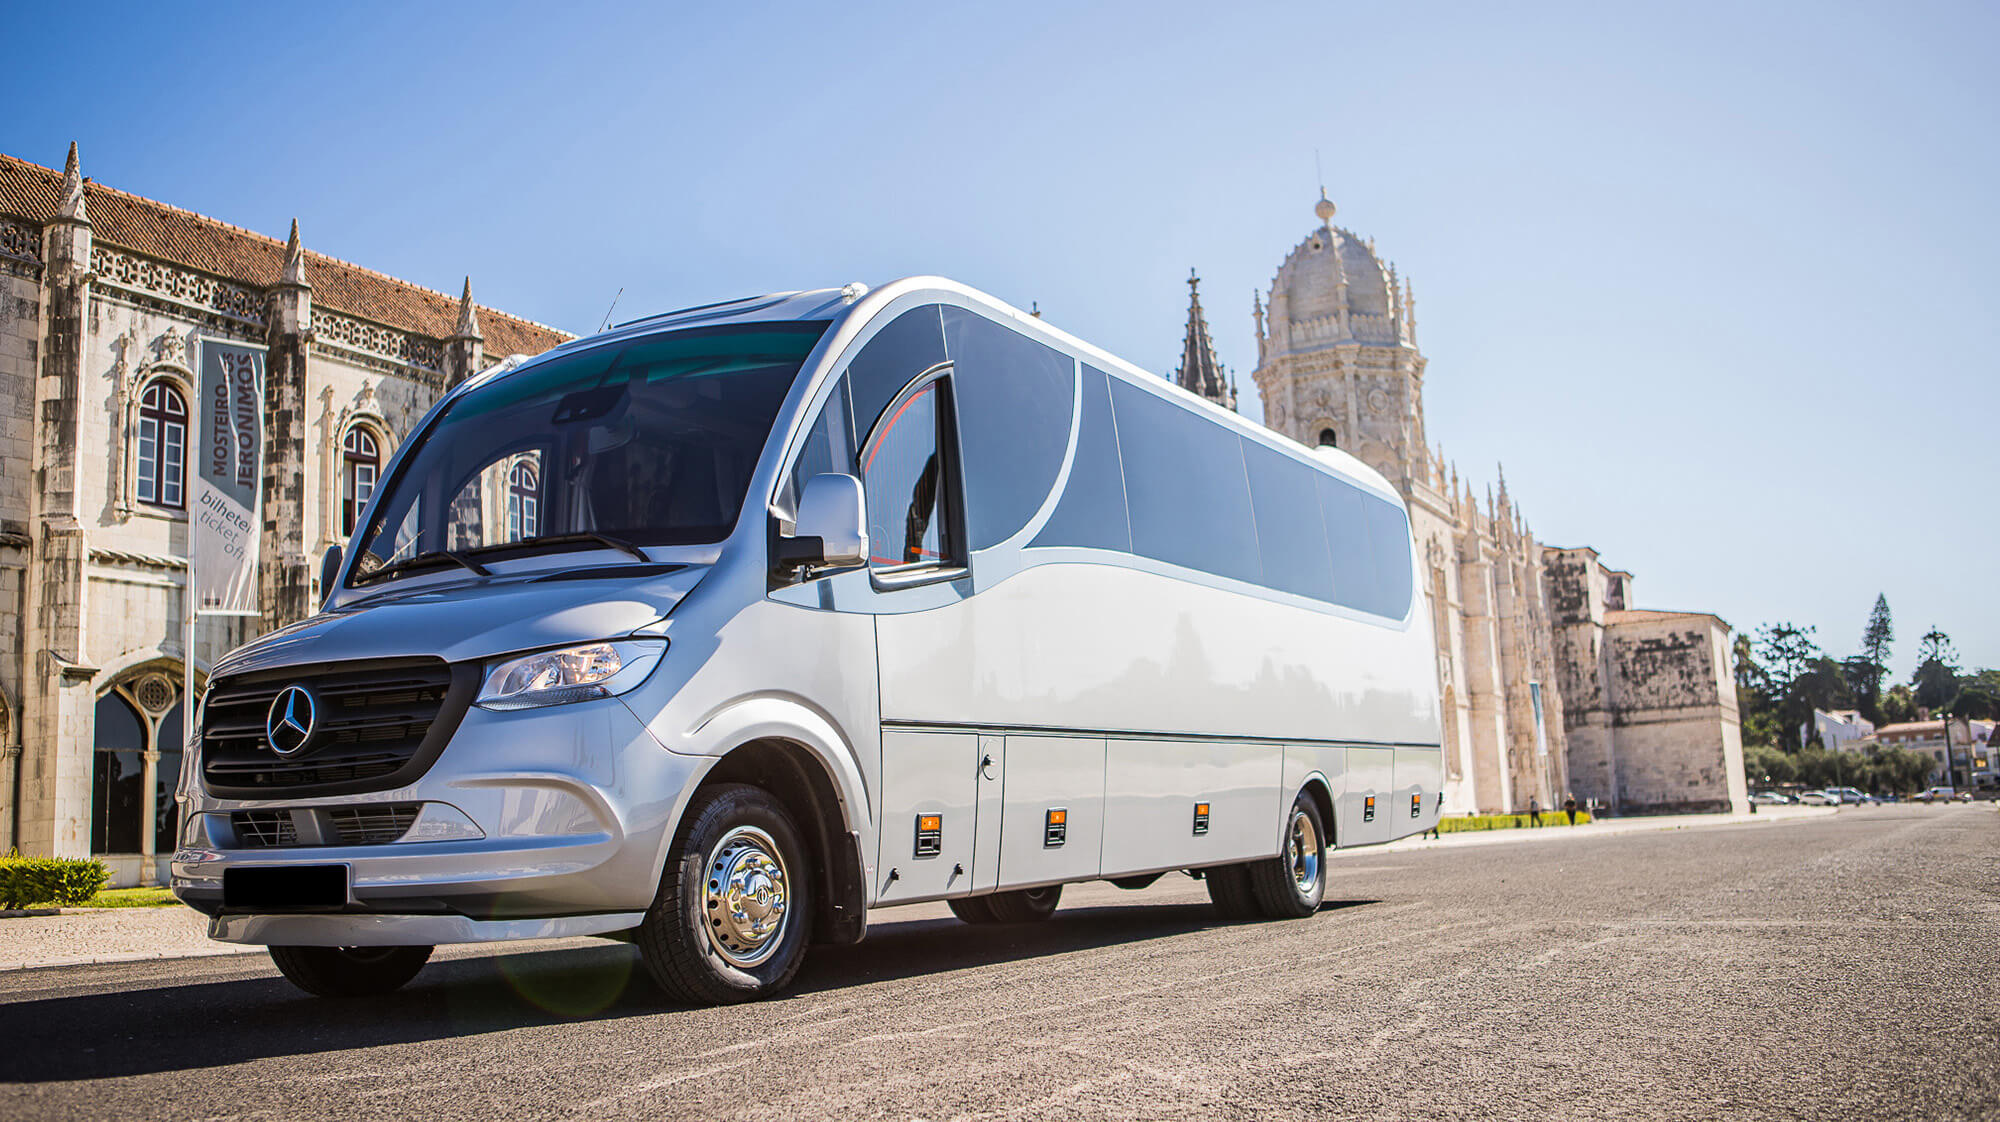 Hire a 20 seater Midibus (Mercedes Sprinter 2018) from SPECIALIMO TRAVEL GROUP in Almargem do Bispo, Sintra 